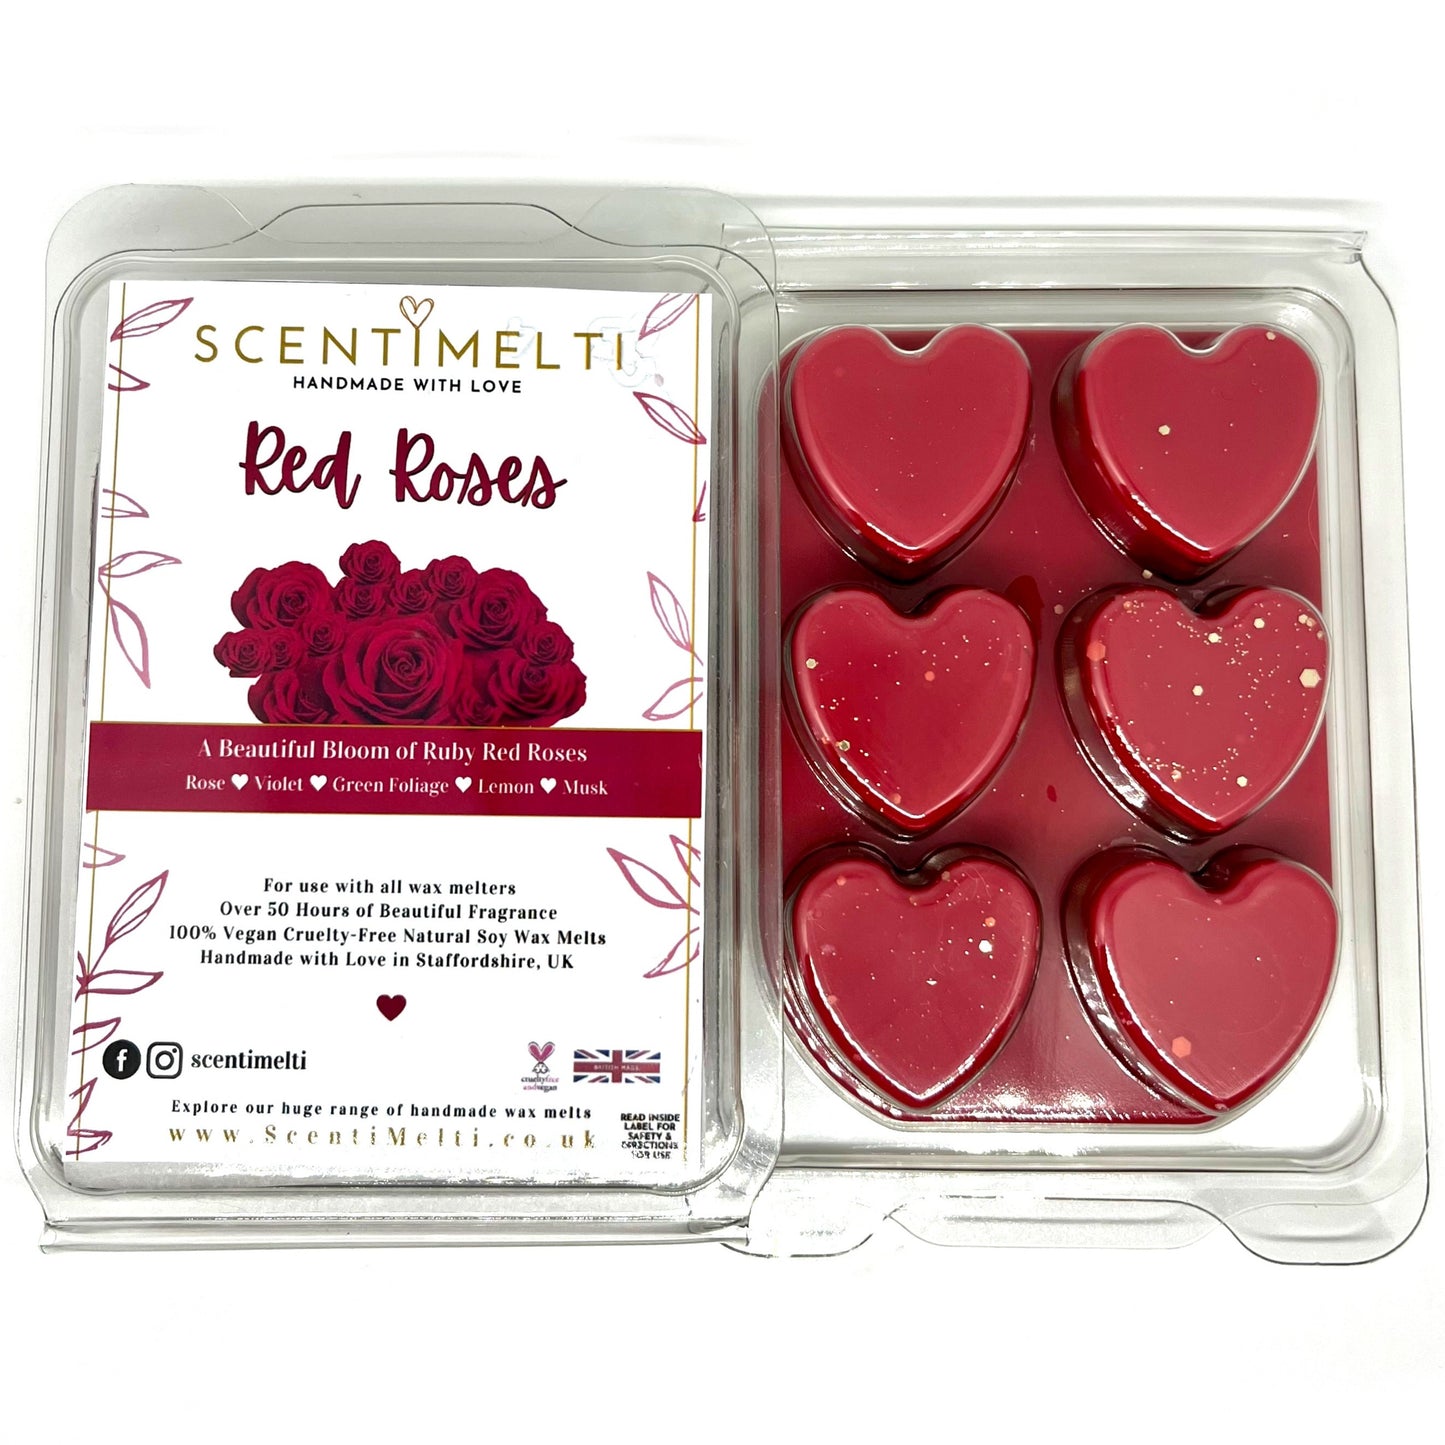 Red Roses JM Inspired Heart Clamshell Wax Melts - ScentiMelti  Red Roses JM Inspired Heart Clamshell Wax Melts